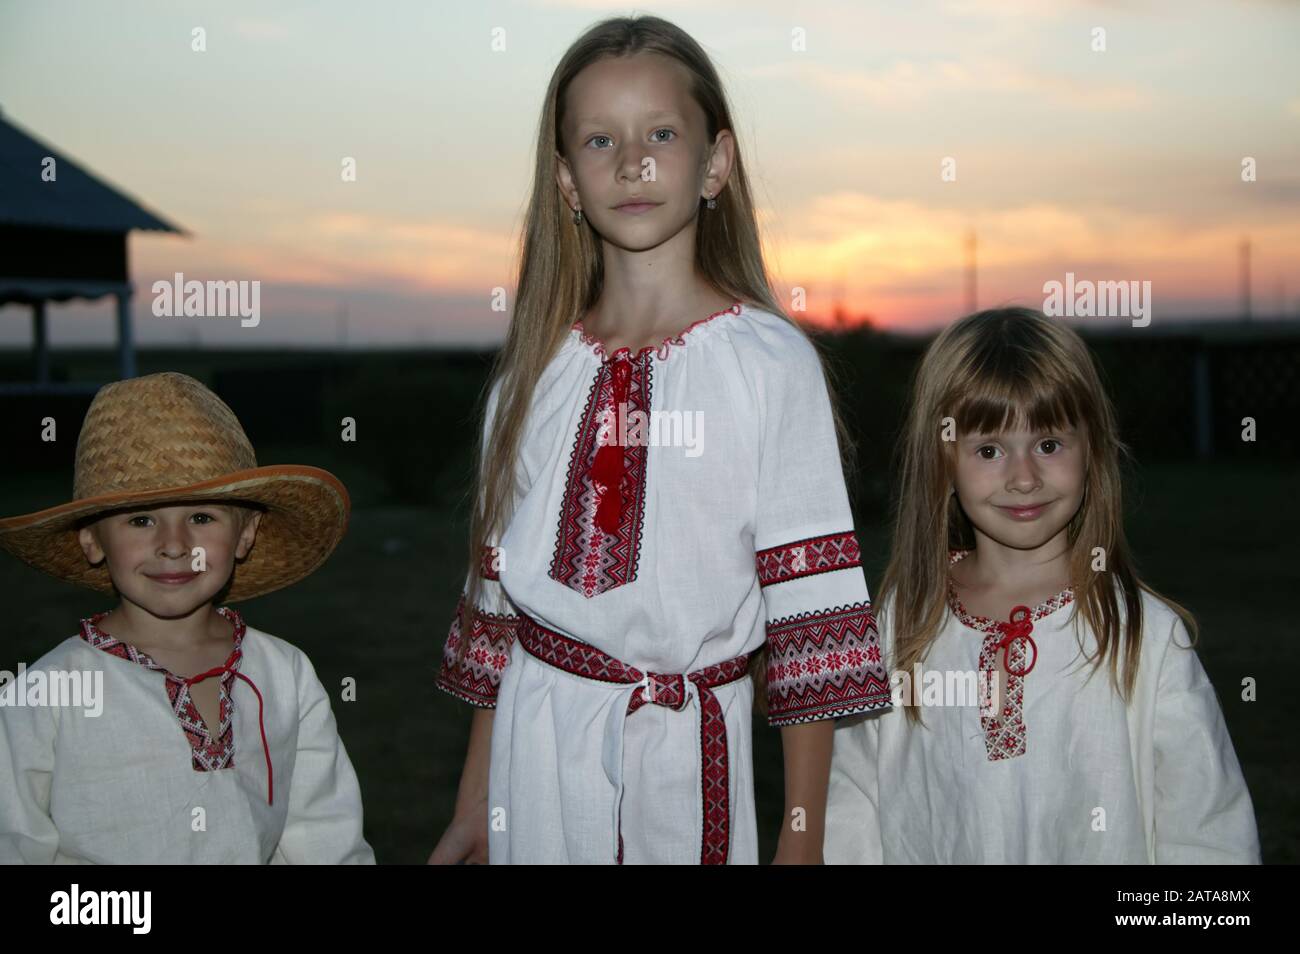 Литовцы славяне. Belarusian people. A boy and a girl wearing the National clothes of Belarus.